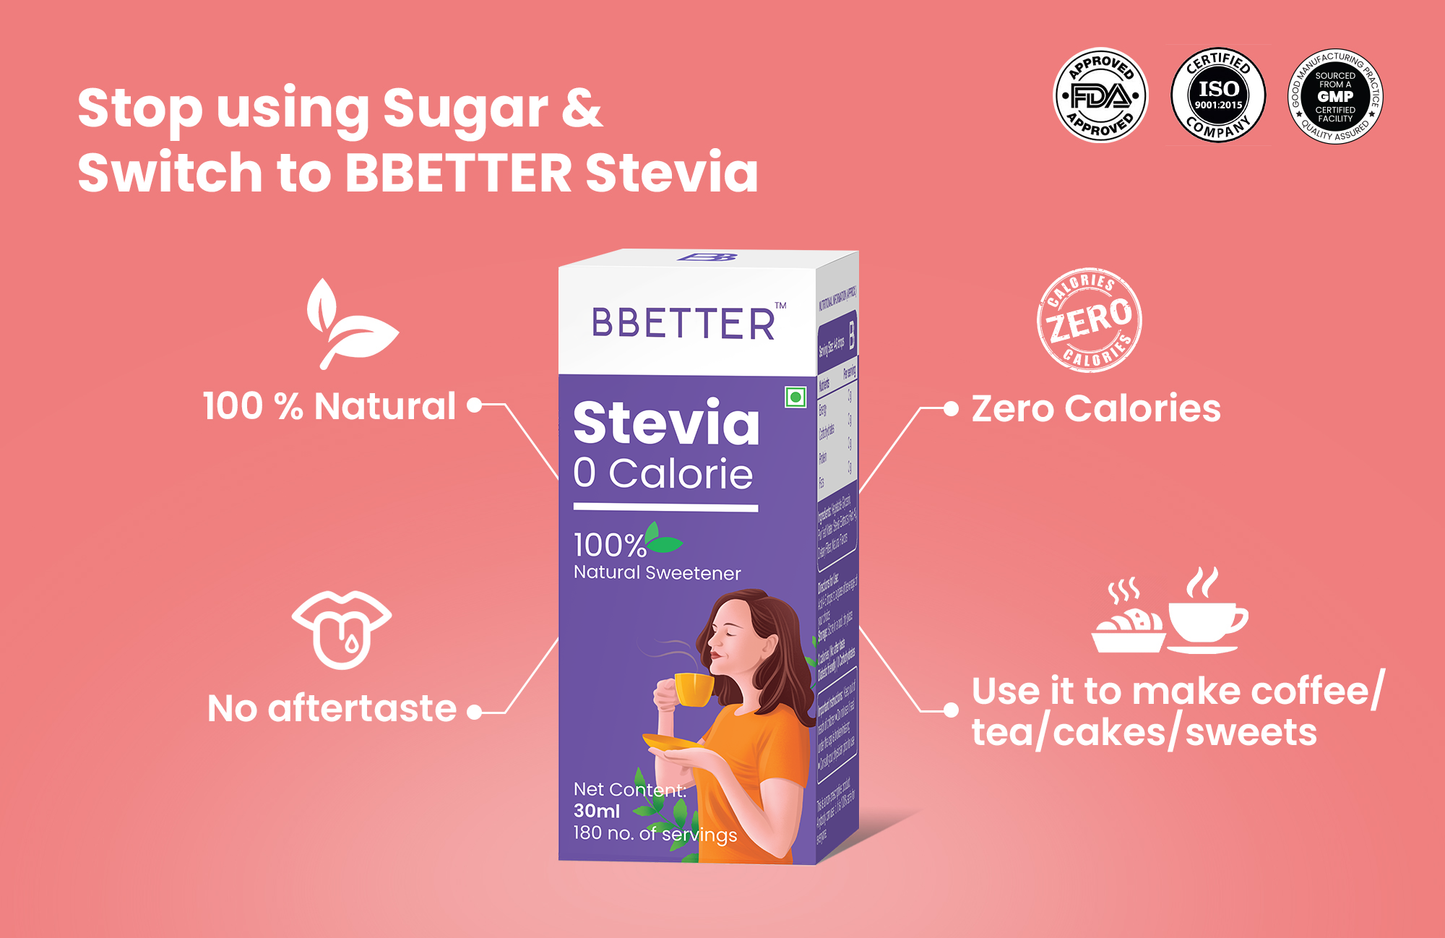 BBETTER Stevia - 100% Natural | 0 Calorie | Pack of 3